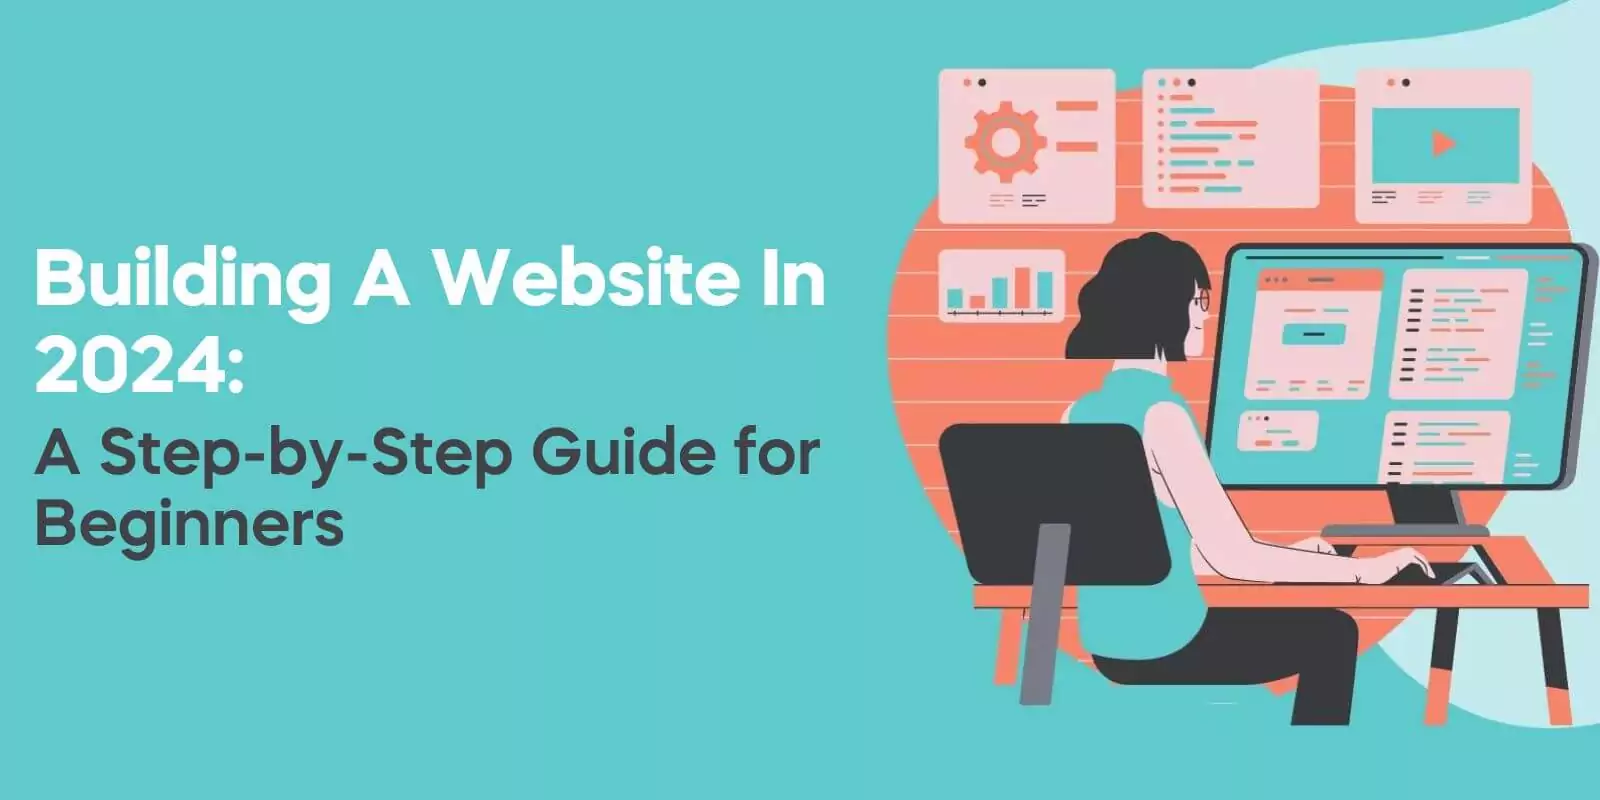 Building a Website in 2024 A Step-by-Step Guide for Beginners